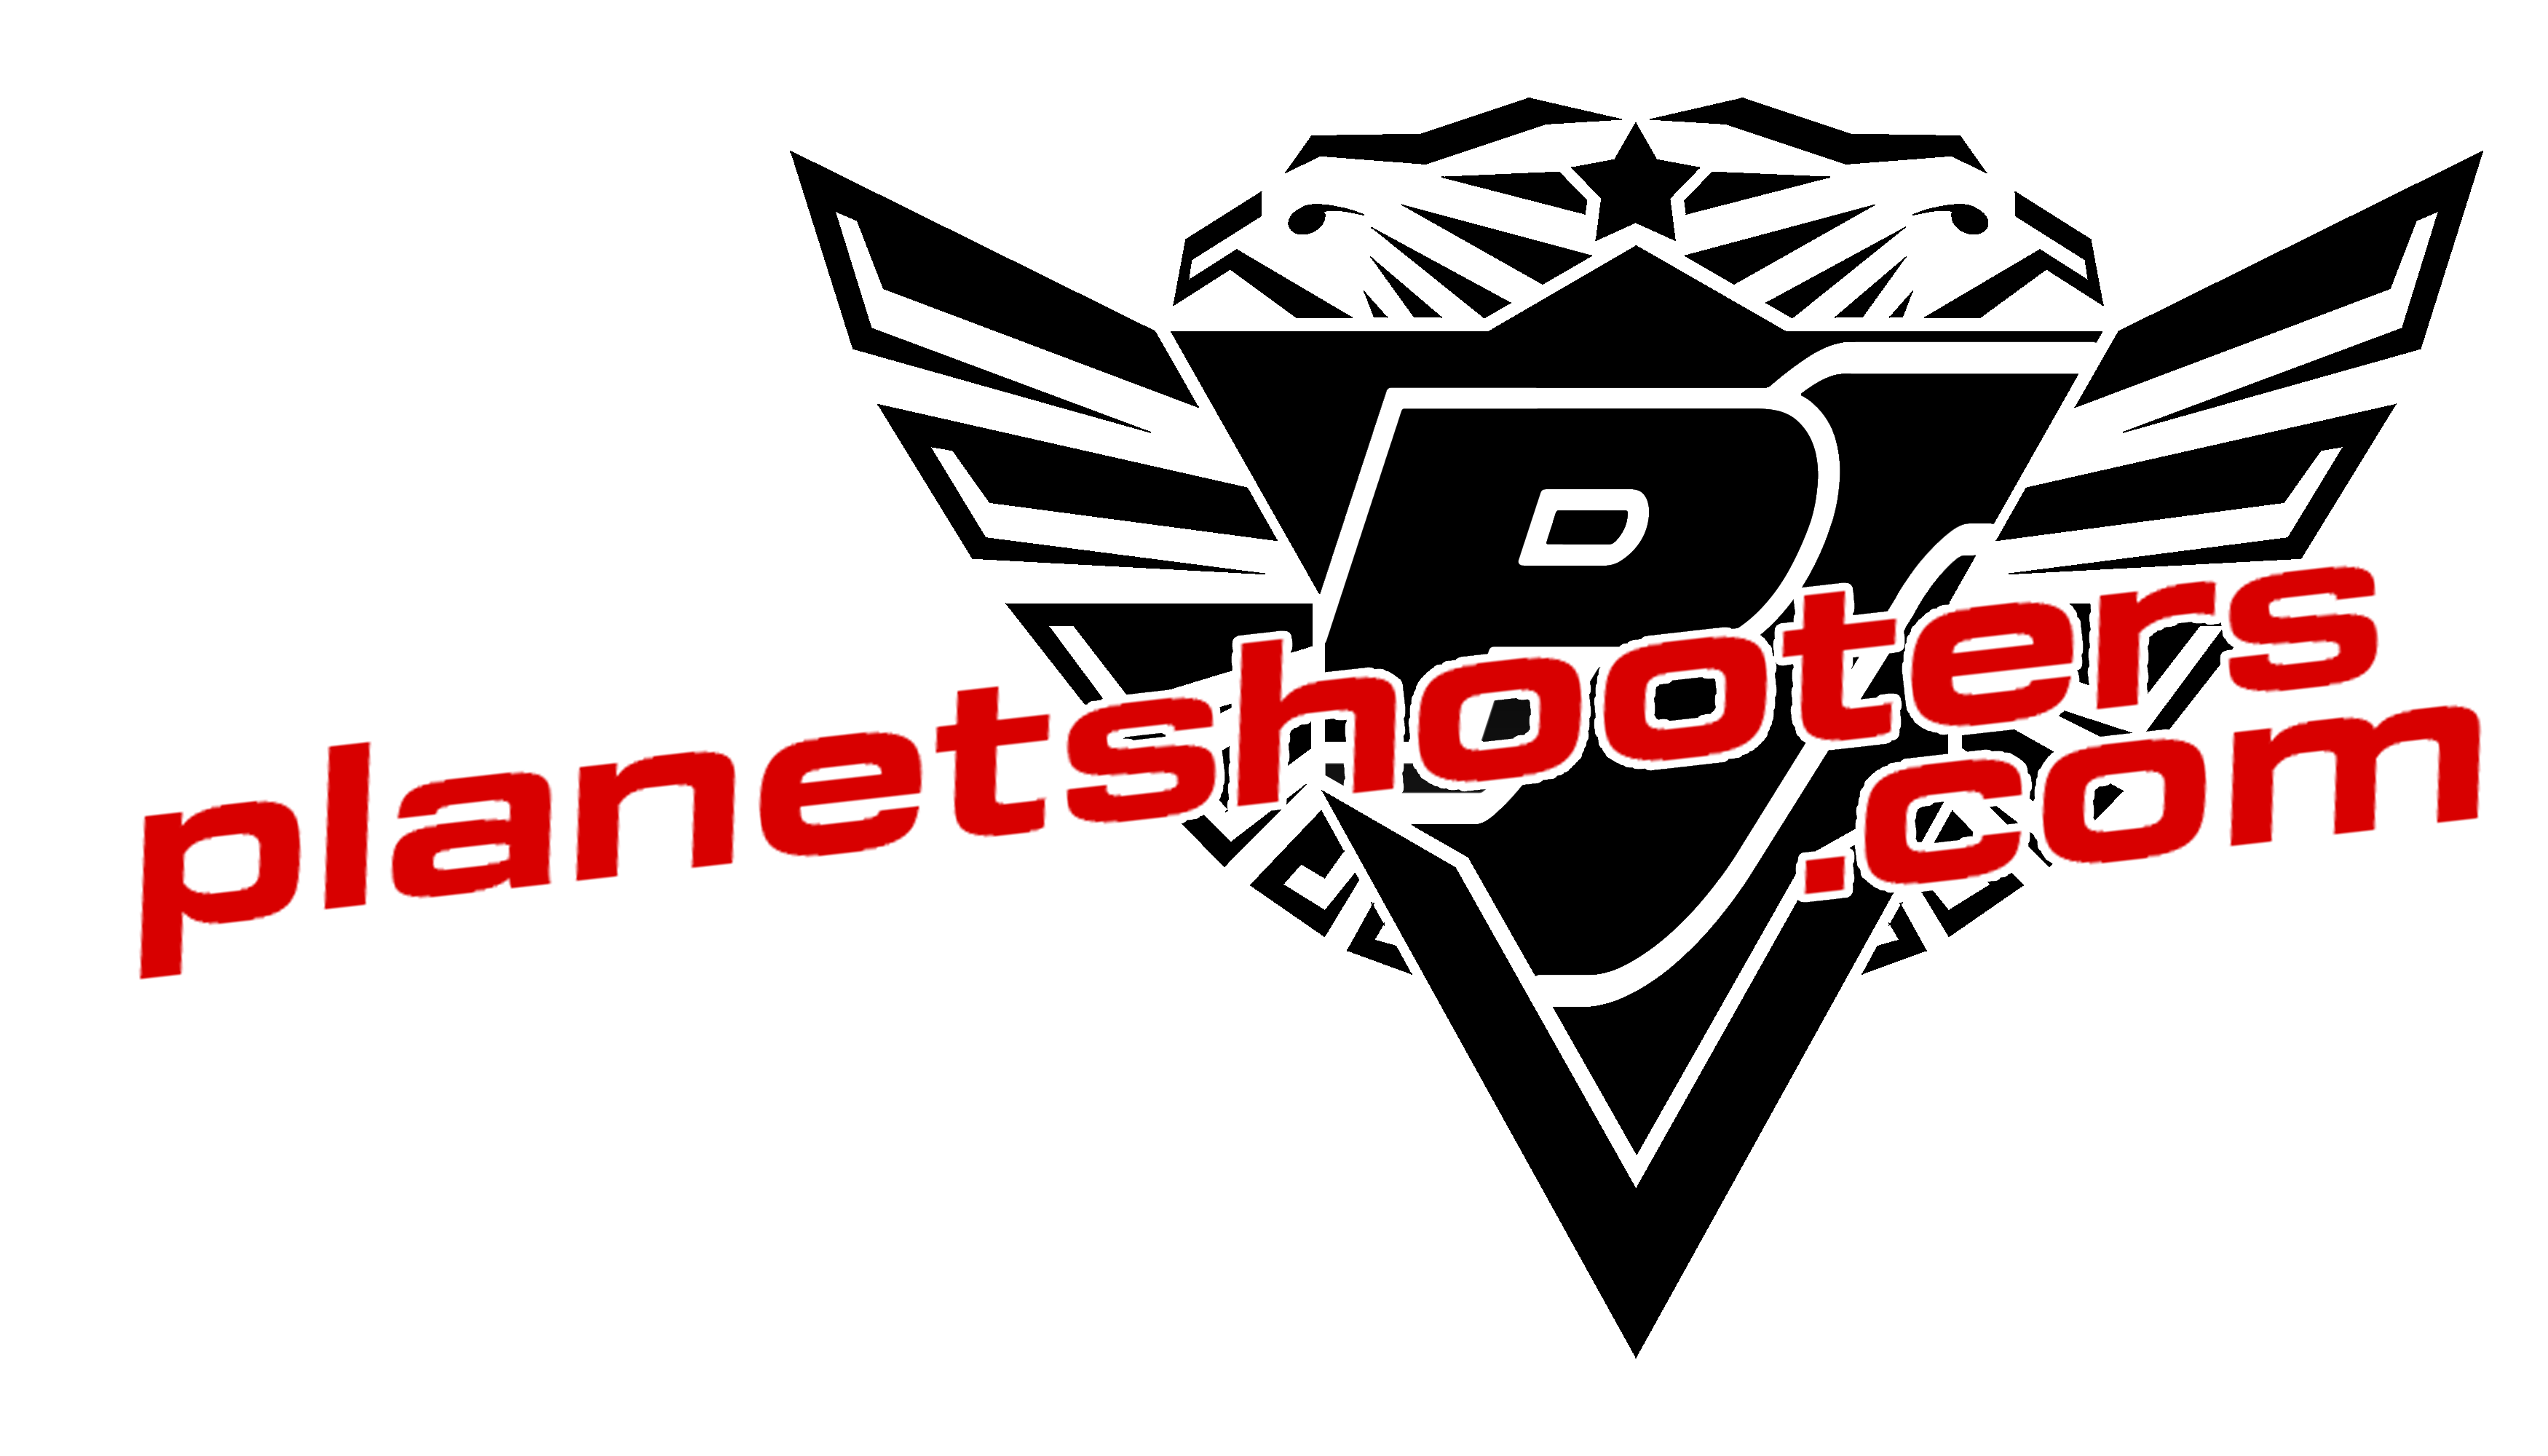 Planet Shooters Logo